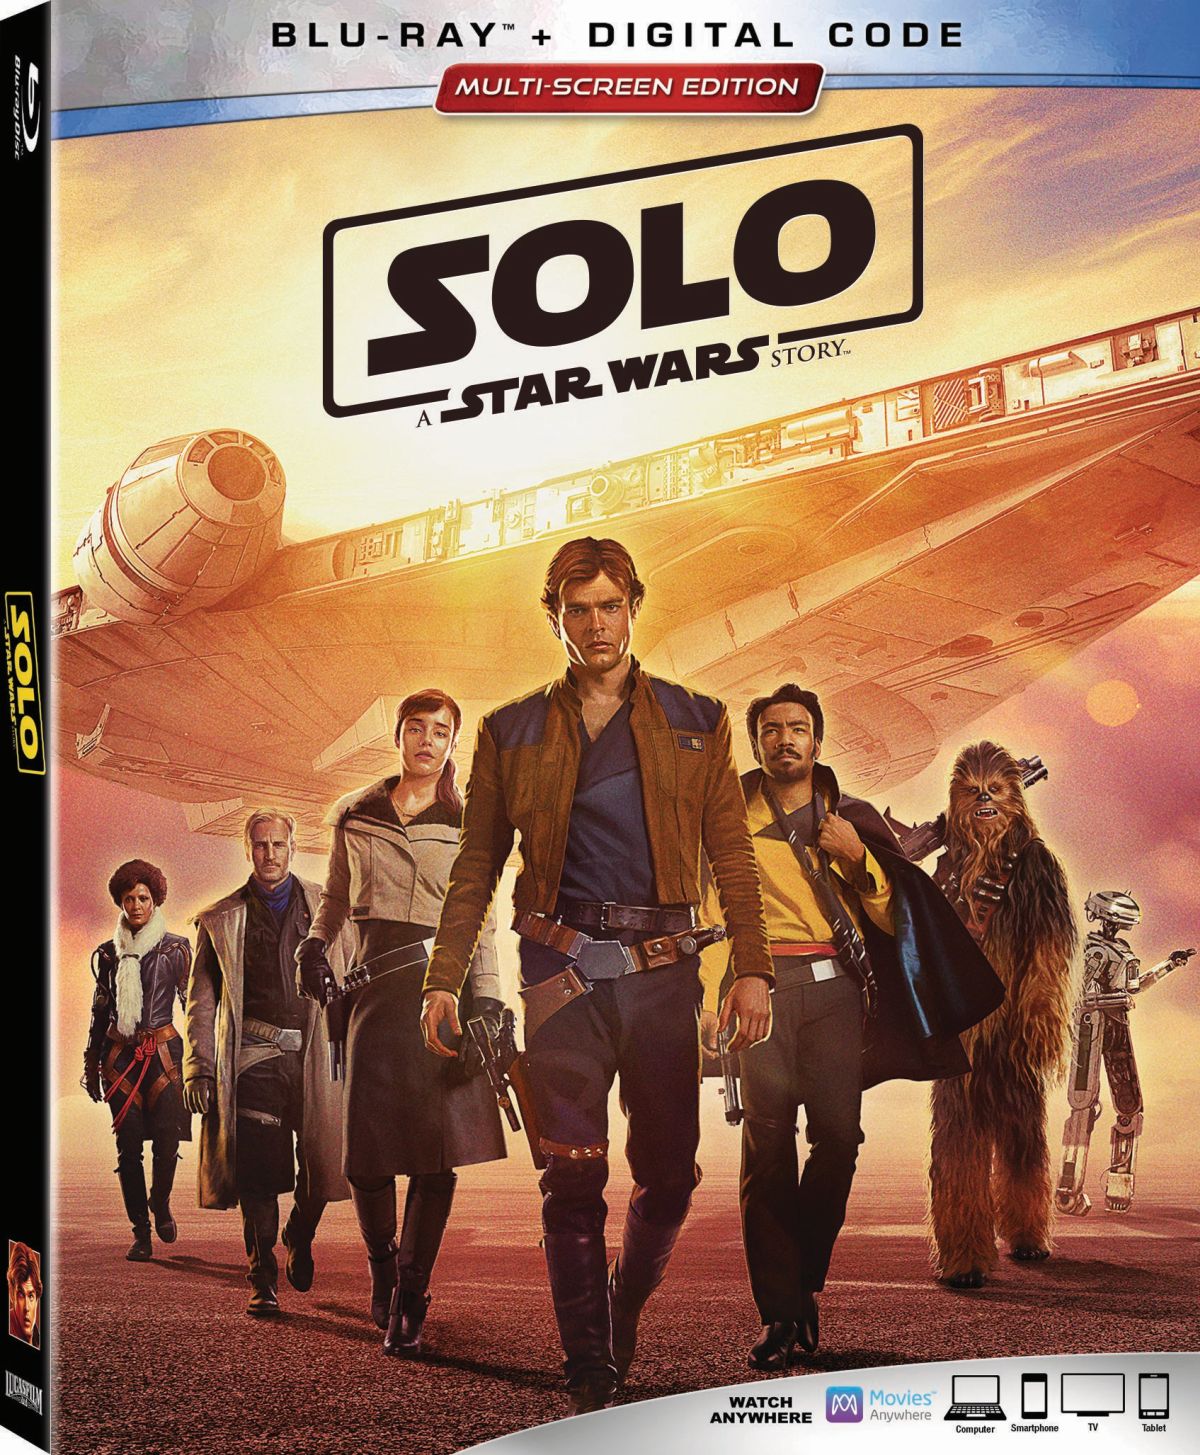 Solo: A Star Wars Story blu-ray cover